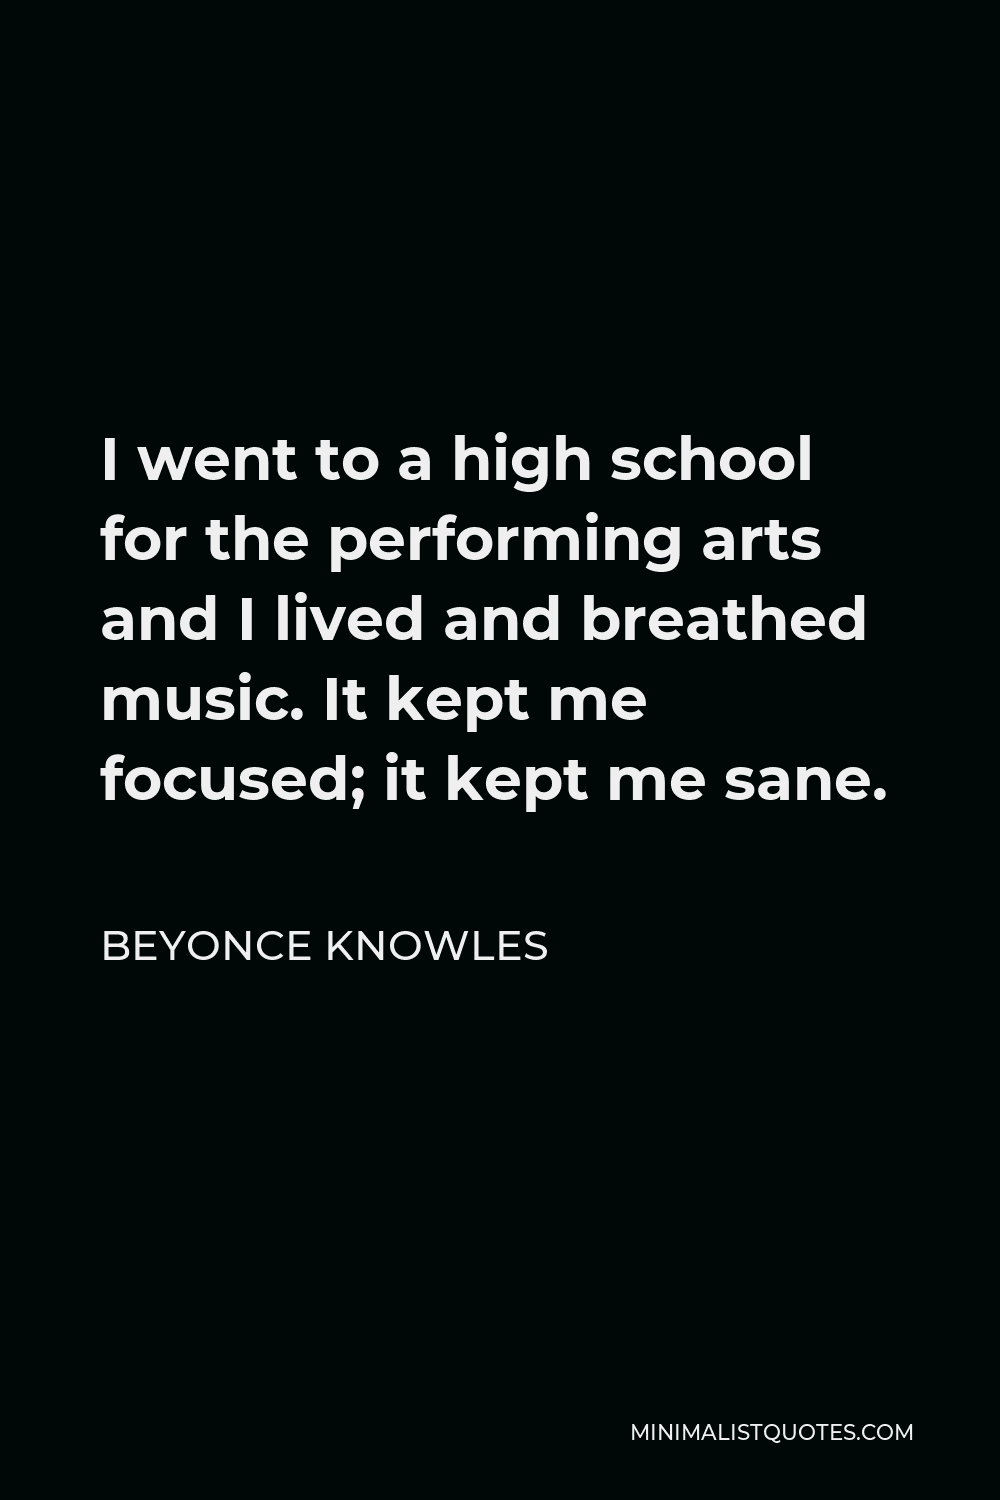 Beyonce Knowles Quote - I went to a high school for the performing arts and I lived and breathed music. It kept me focused; it kept me sane.